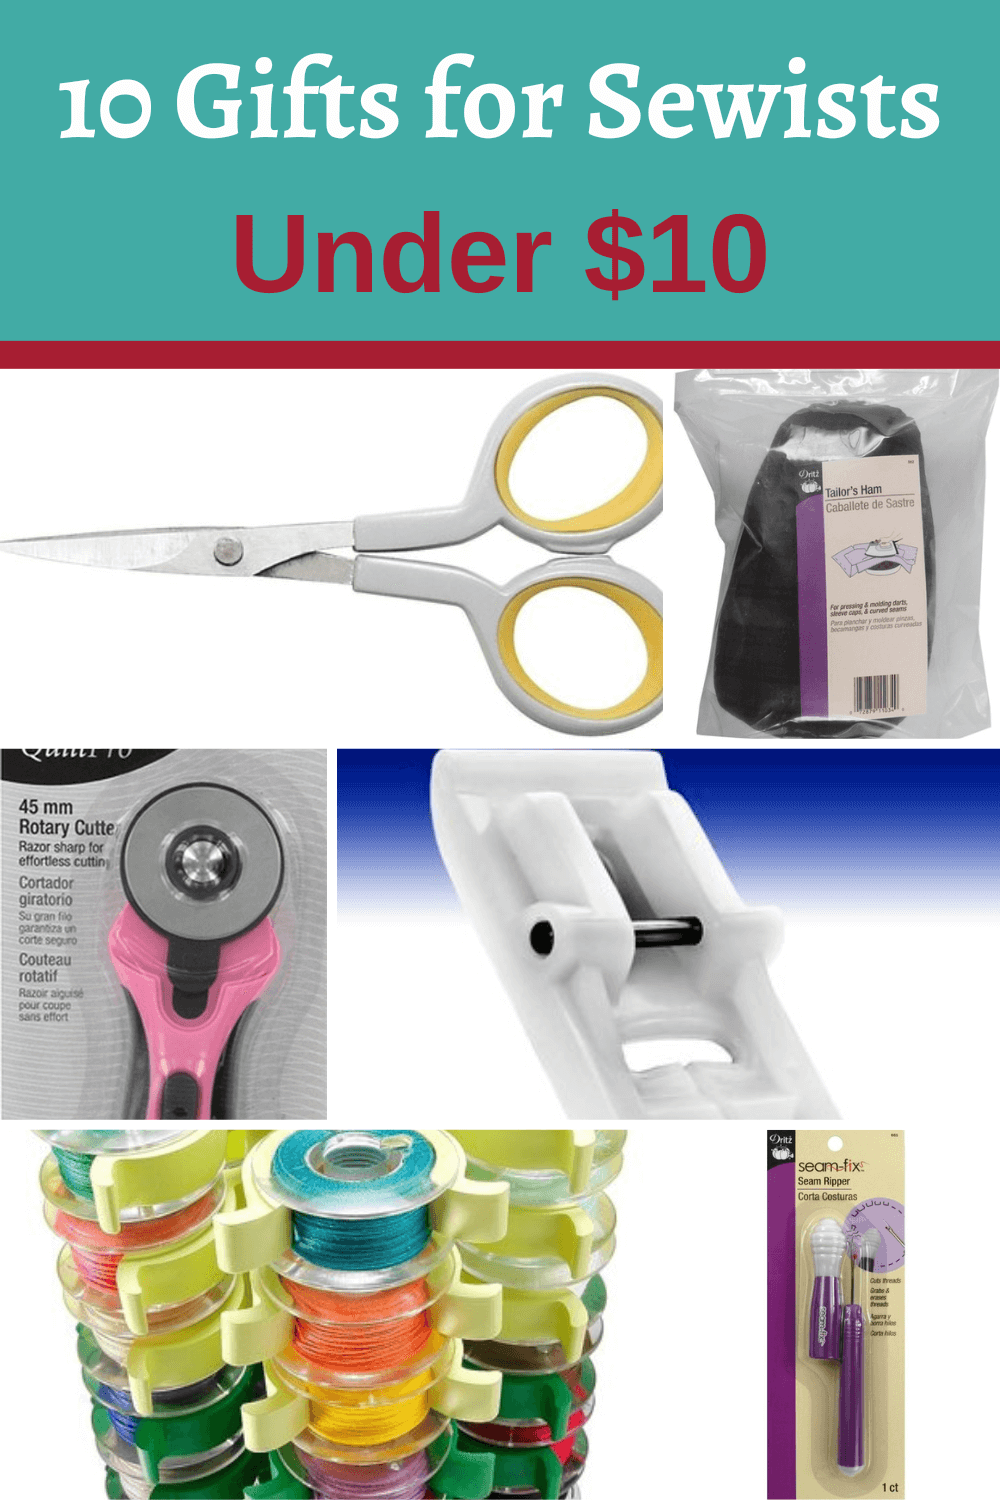 10 Gifts for Sewists for Under $10!